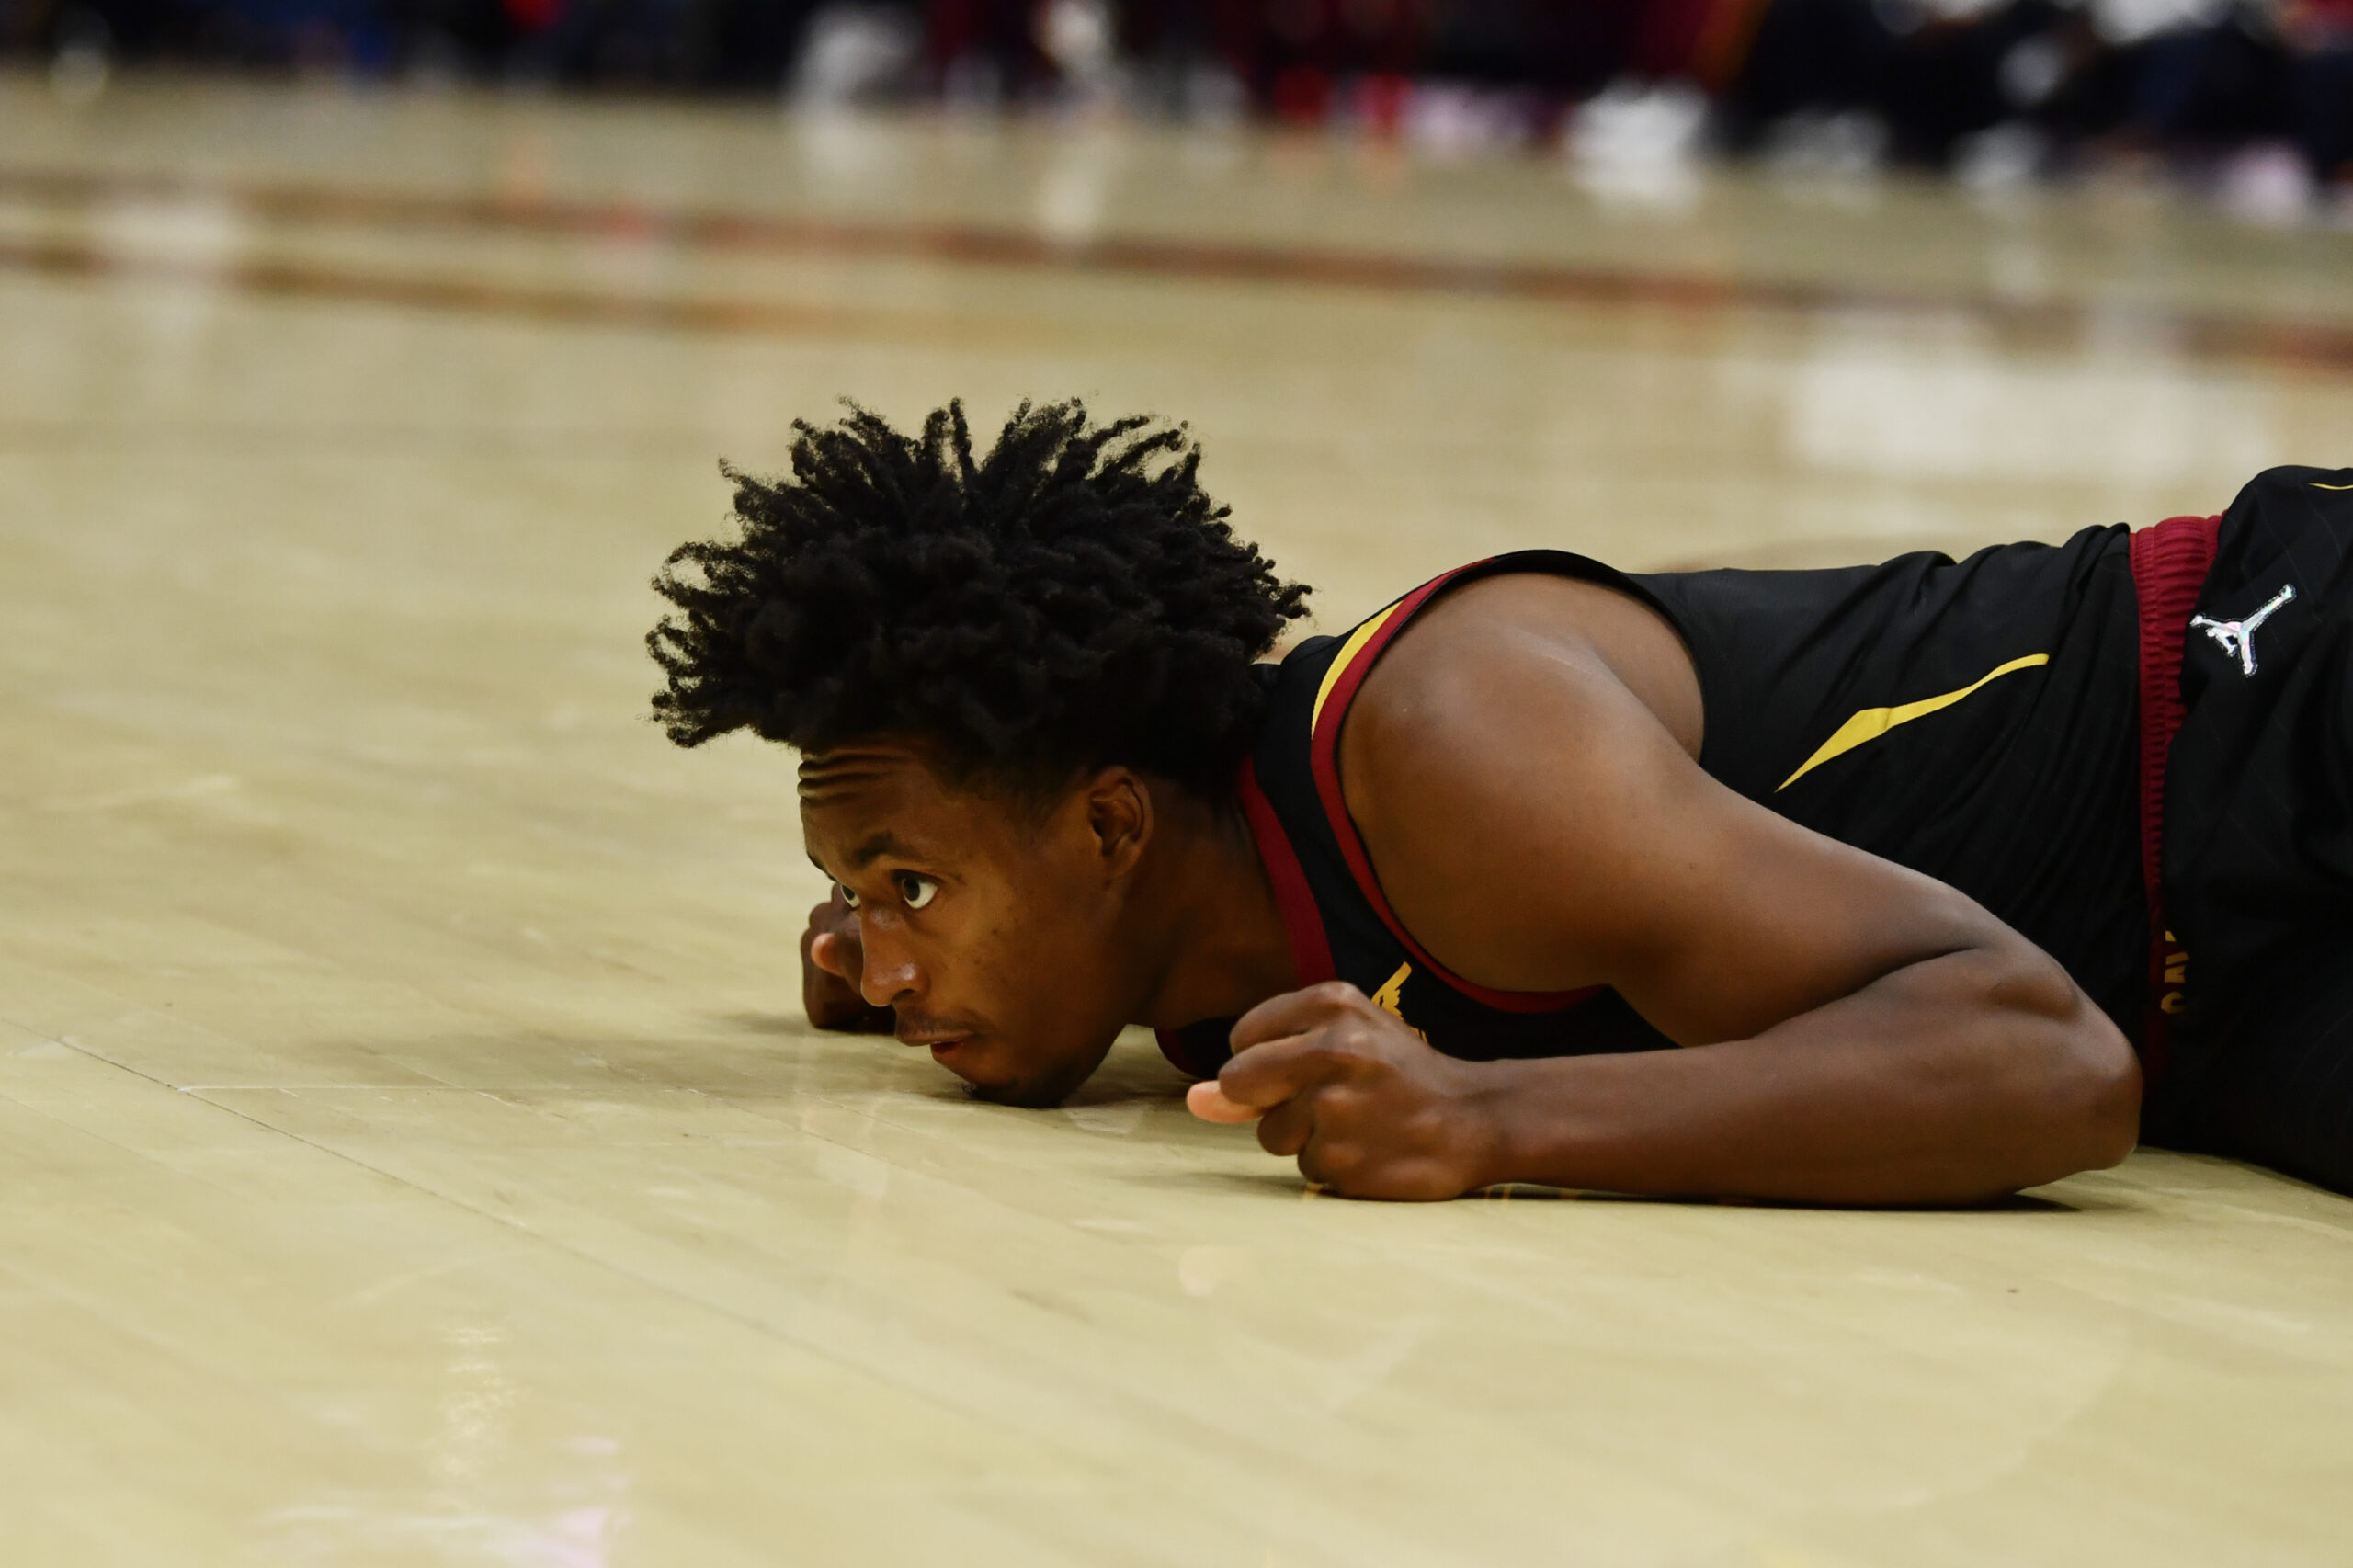 Collin Sexton deserves more than what the free agent market seems willing to pay him